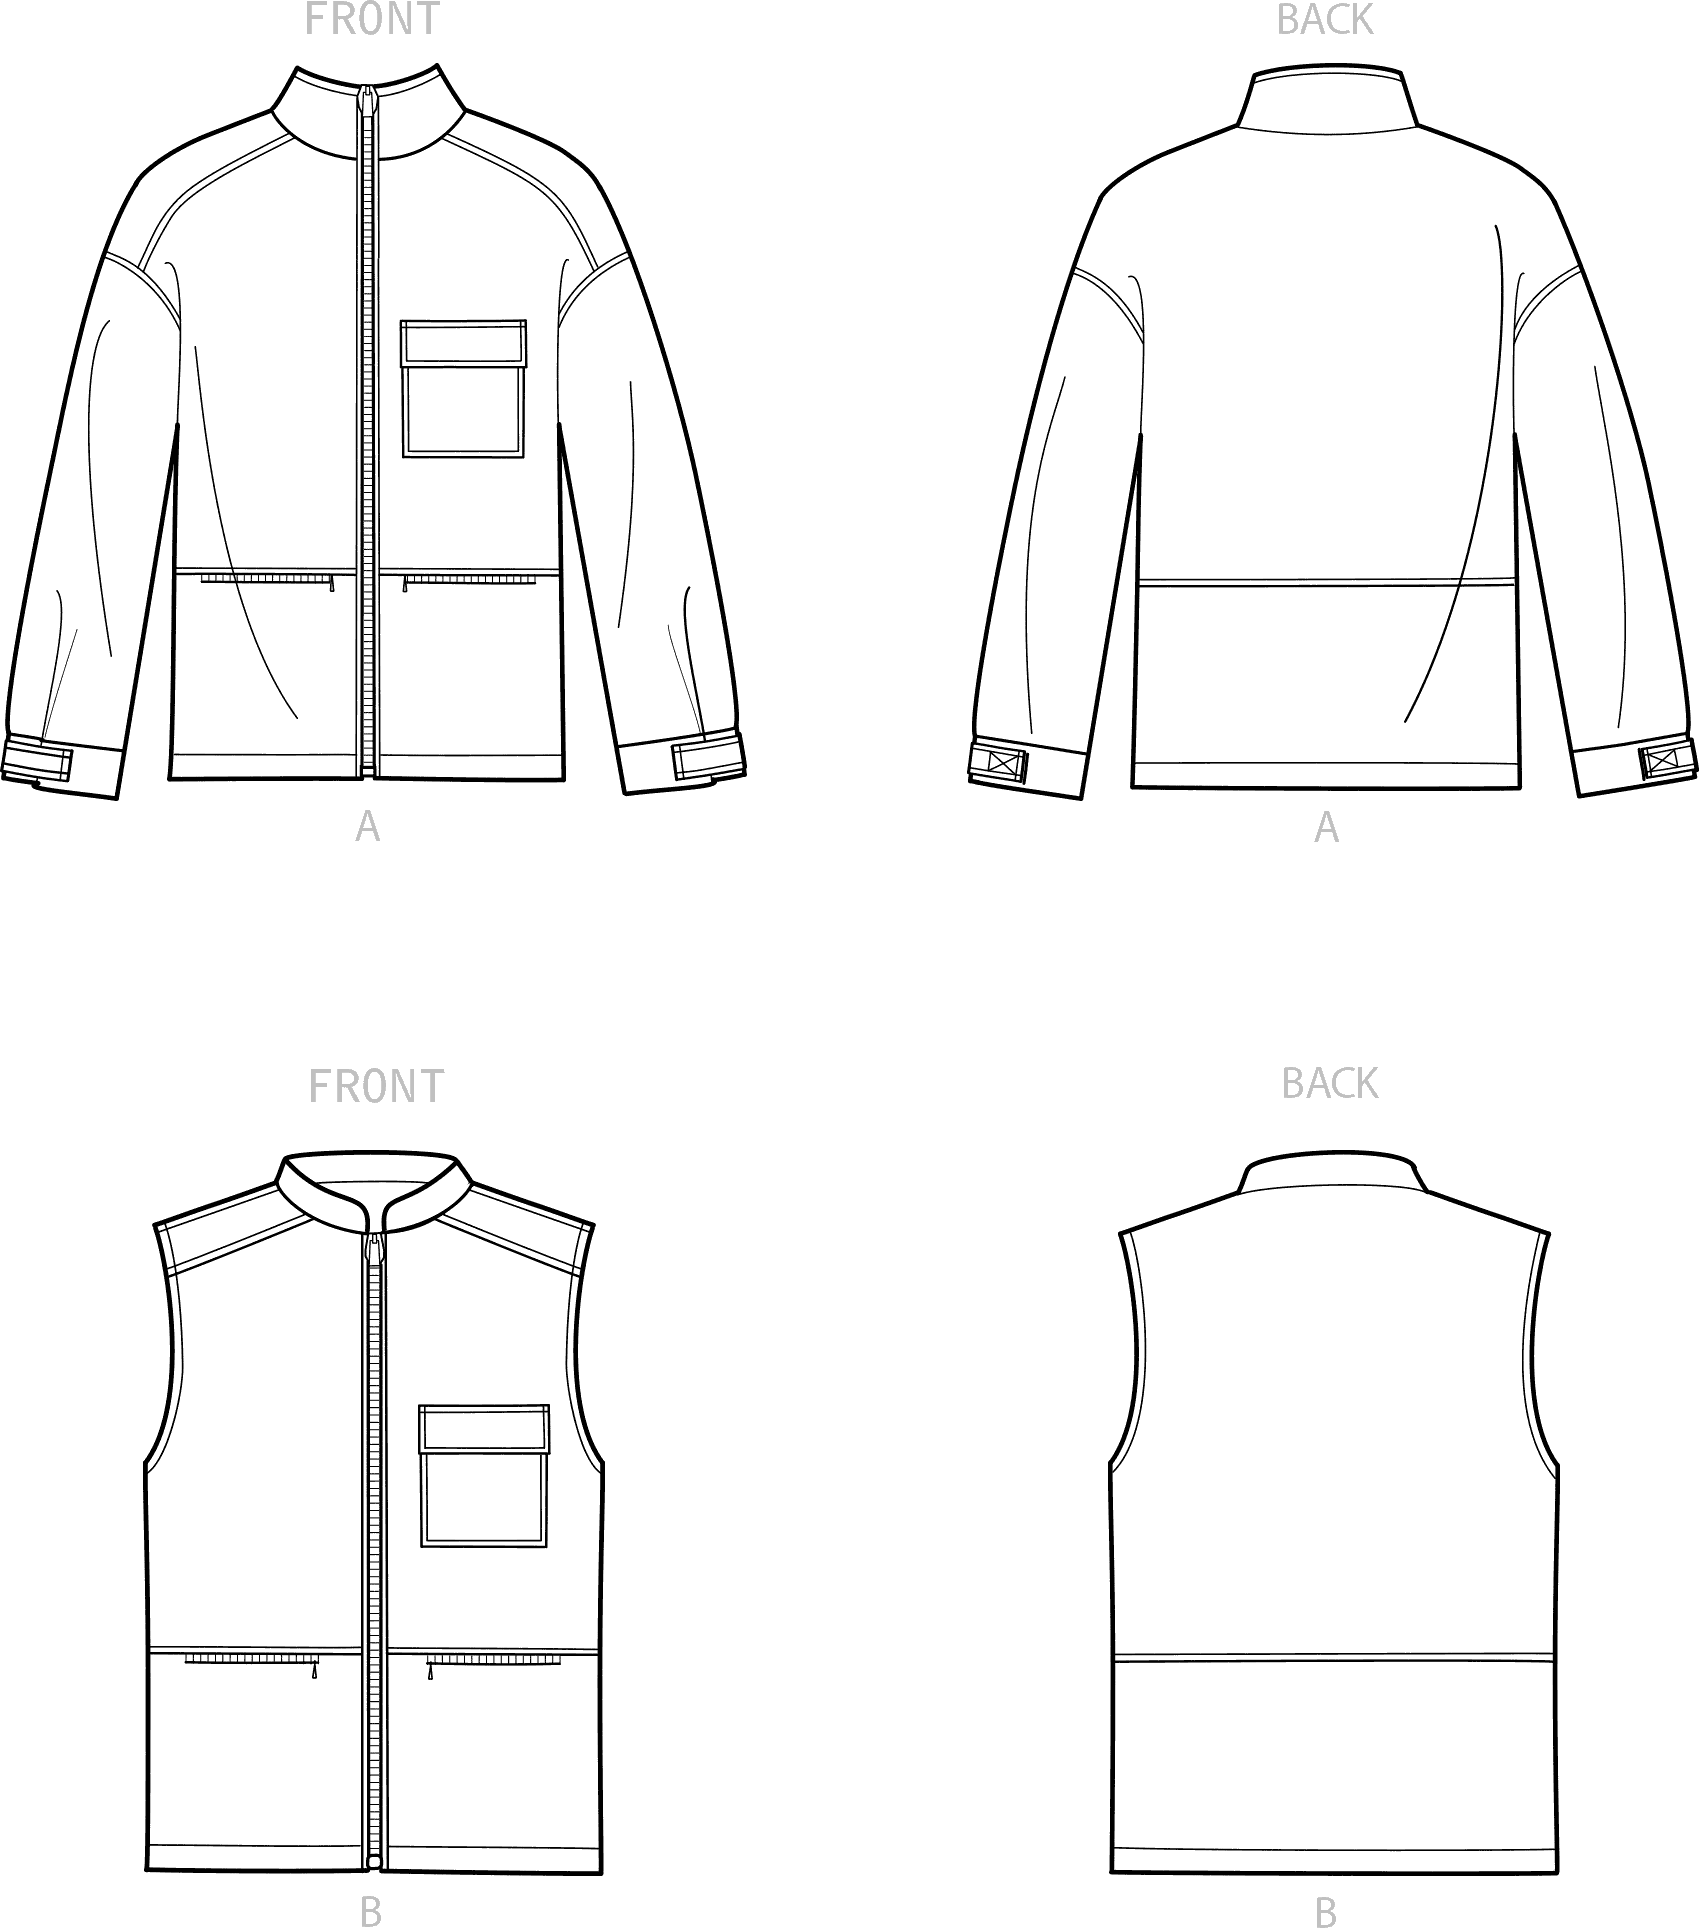 New Look Sewing Pattern N6713 Unisex Zippered Jacket and Vest 6713 Line Art From Patternsandplains.com